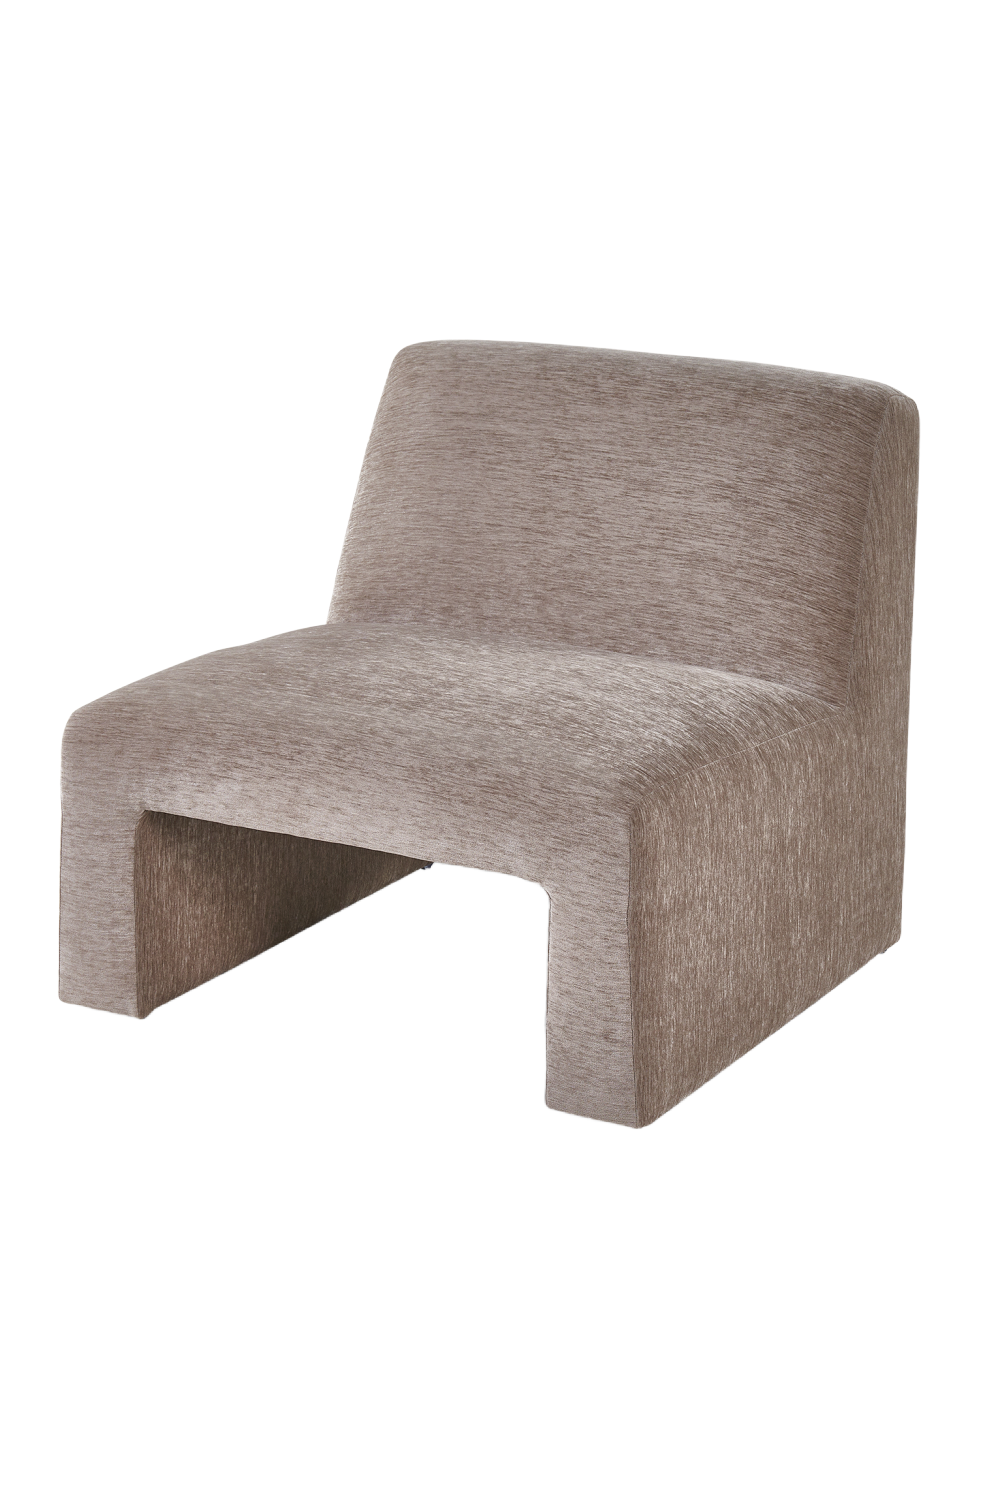 Chenille Occasional Chair | Liang & Eimil Arnot | Oroa.com